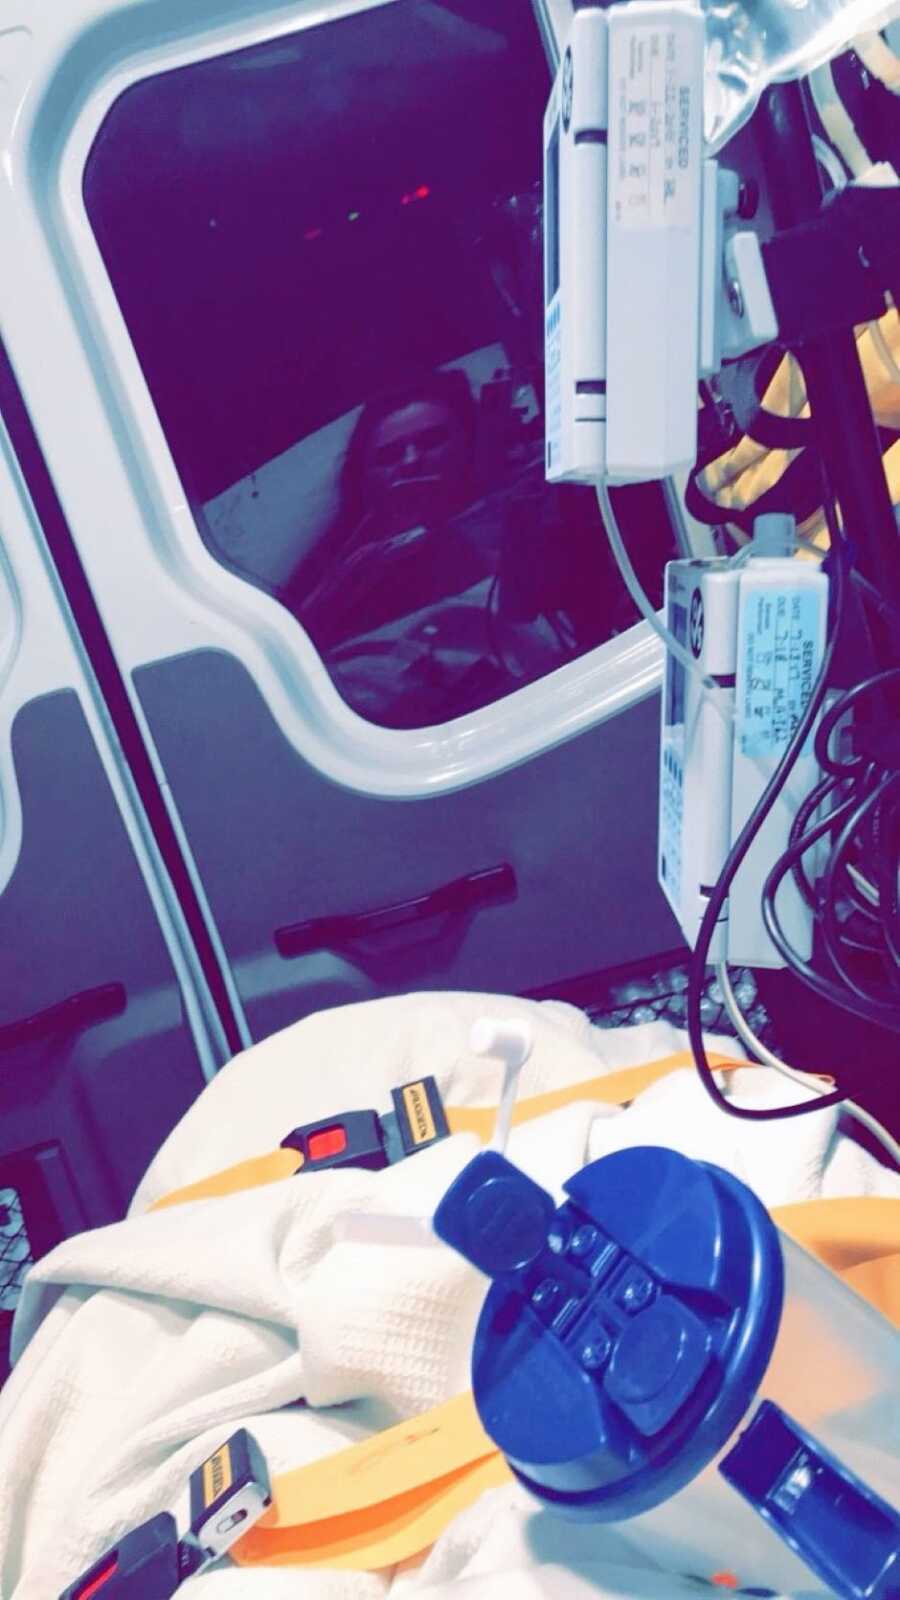 Woman suffering from a miscarriage takes a photo in the back of an ambulance